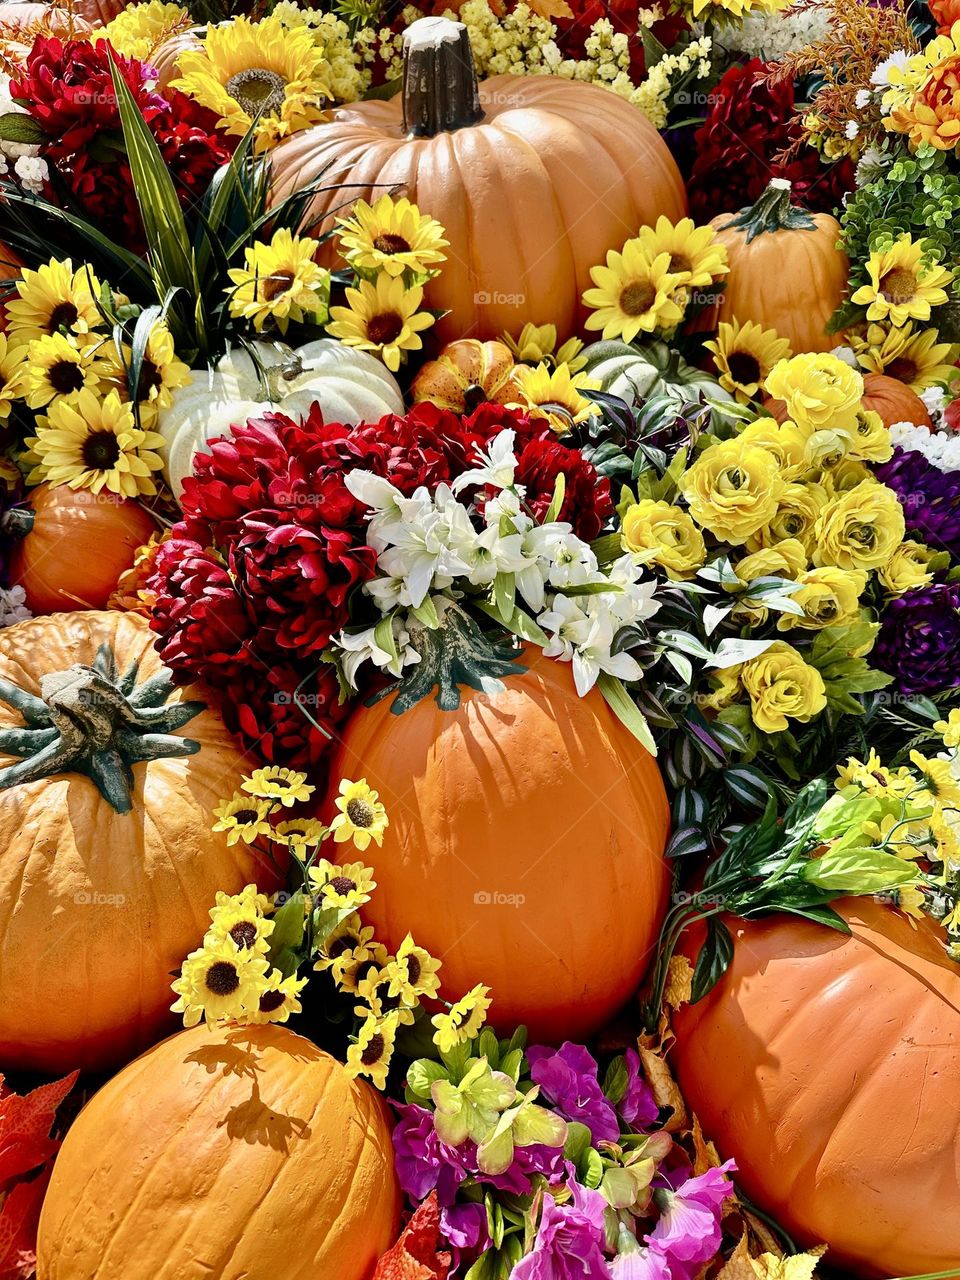 Battle: Summer vs Fall - In the autumn season, the daylight grows shorter, and the temperature starts to become cooler. Leaves on the trees will turn yellow, orange, red and brown during autumn. Pumpkins and flowers are colorful. 